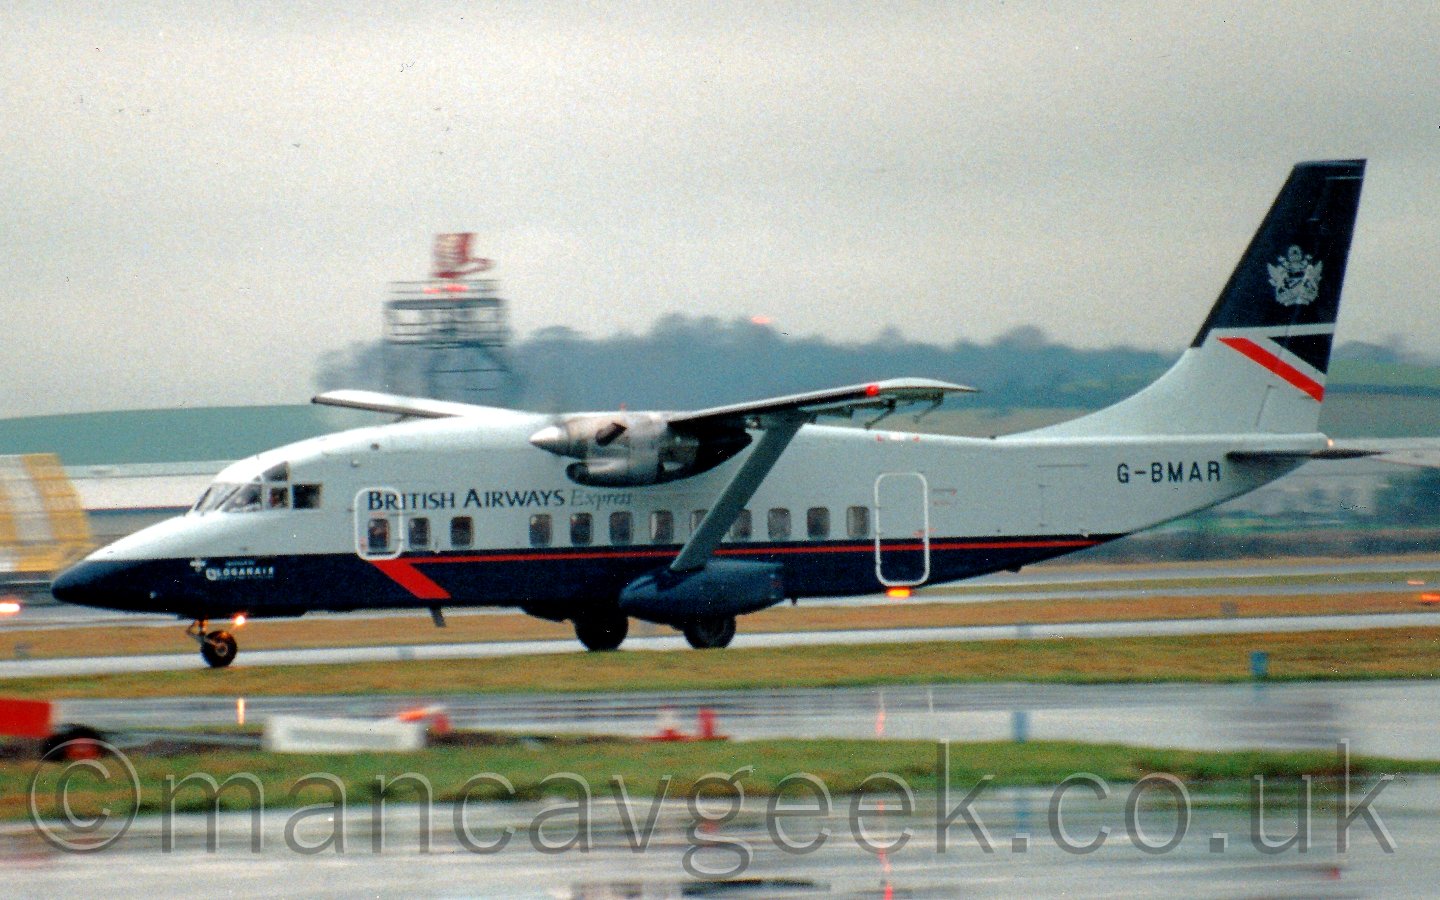 Side view of a high-winged, twin propellor-engined airlinermoving at high speed from right to left. The plane is mostly grey, with a dark blue lower section with a thin red stripe running along most of the body. There are dark blue "British Airways Express" titles on the forward fuselage, just above the cabin windows. The registration G-BMAR is on the upper rear fuselage, just under the tail. The tail itself has a grey upper half, with a dark blue top with a silver royal crest, with a red and blue triangle seperating the top and bottom sections. In the background, various airport buildings and a radar tower are almost blurred into smears as the camera pans with the plane.